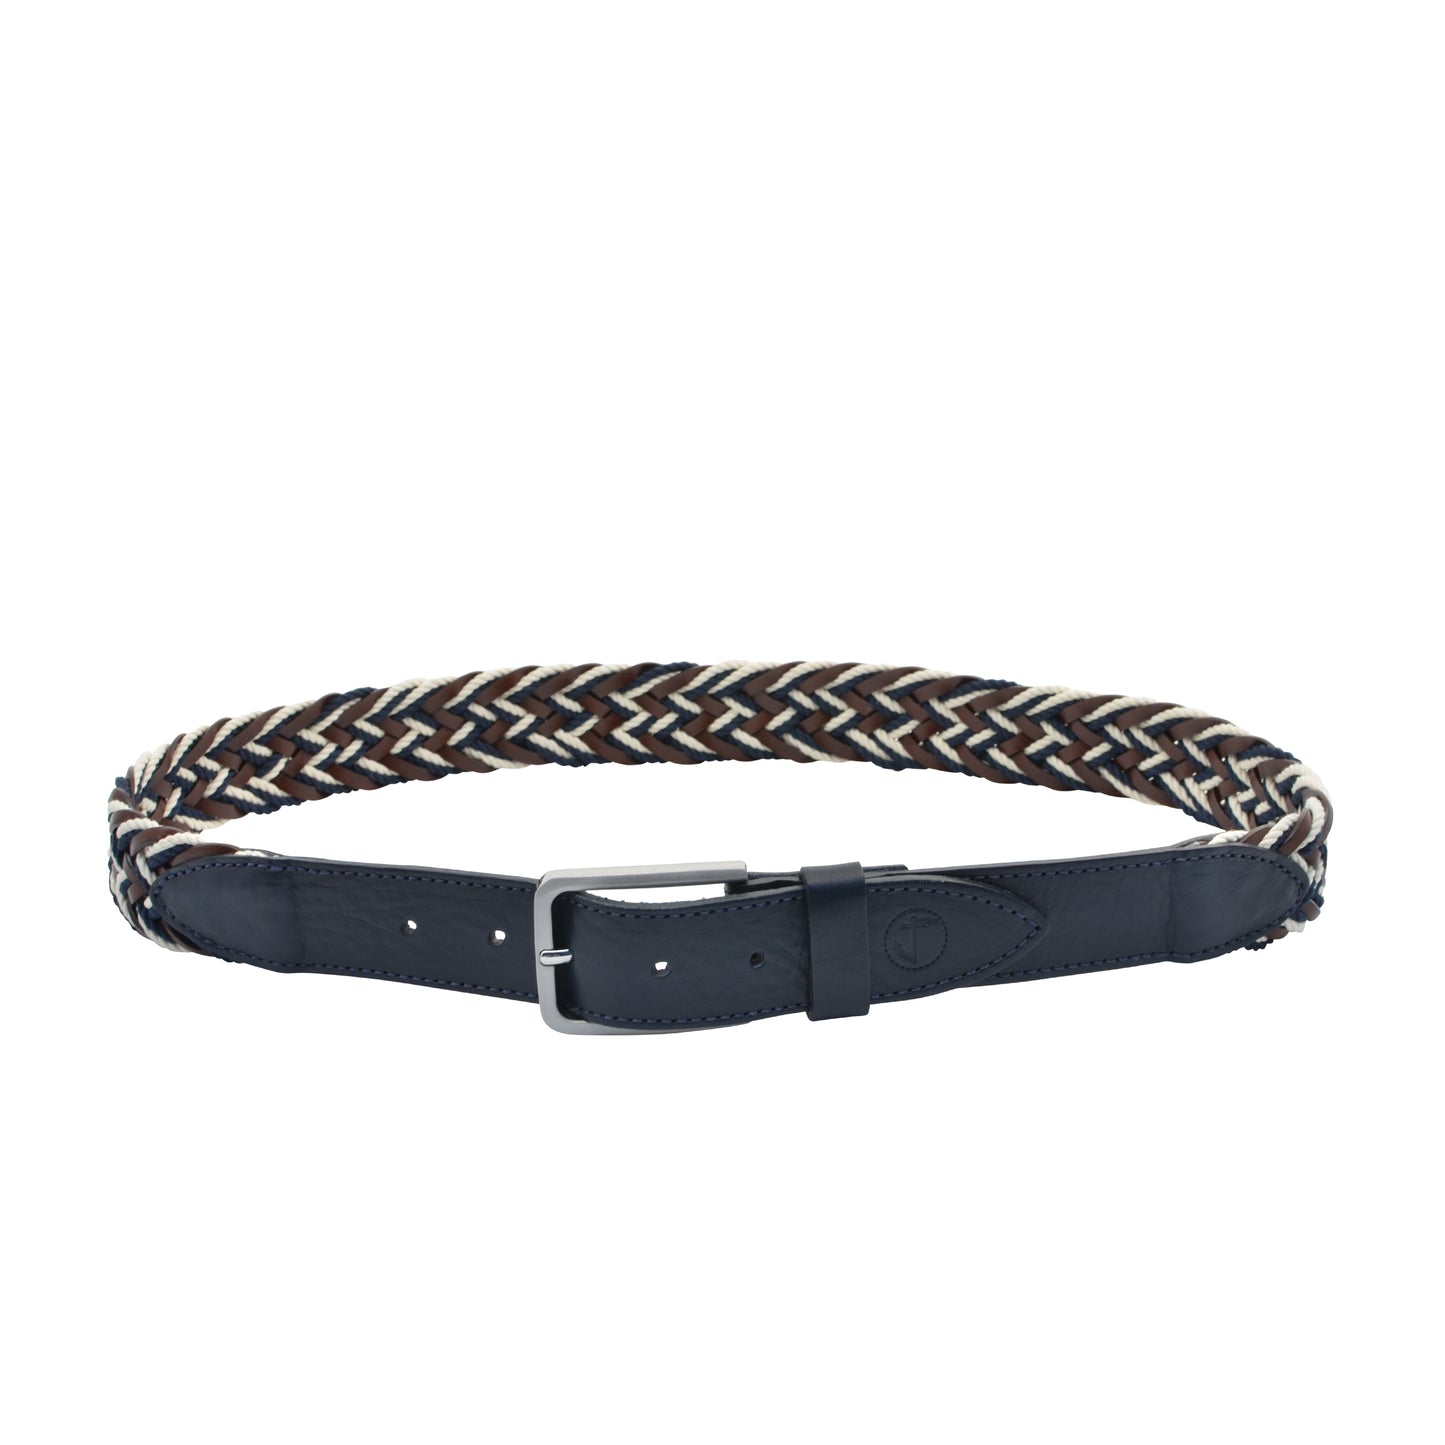 Braided Nautical Rope and Leather Belt Bering Seajure